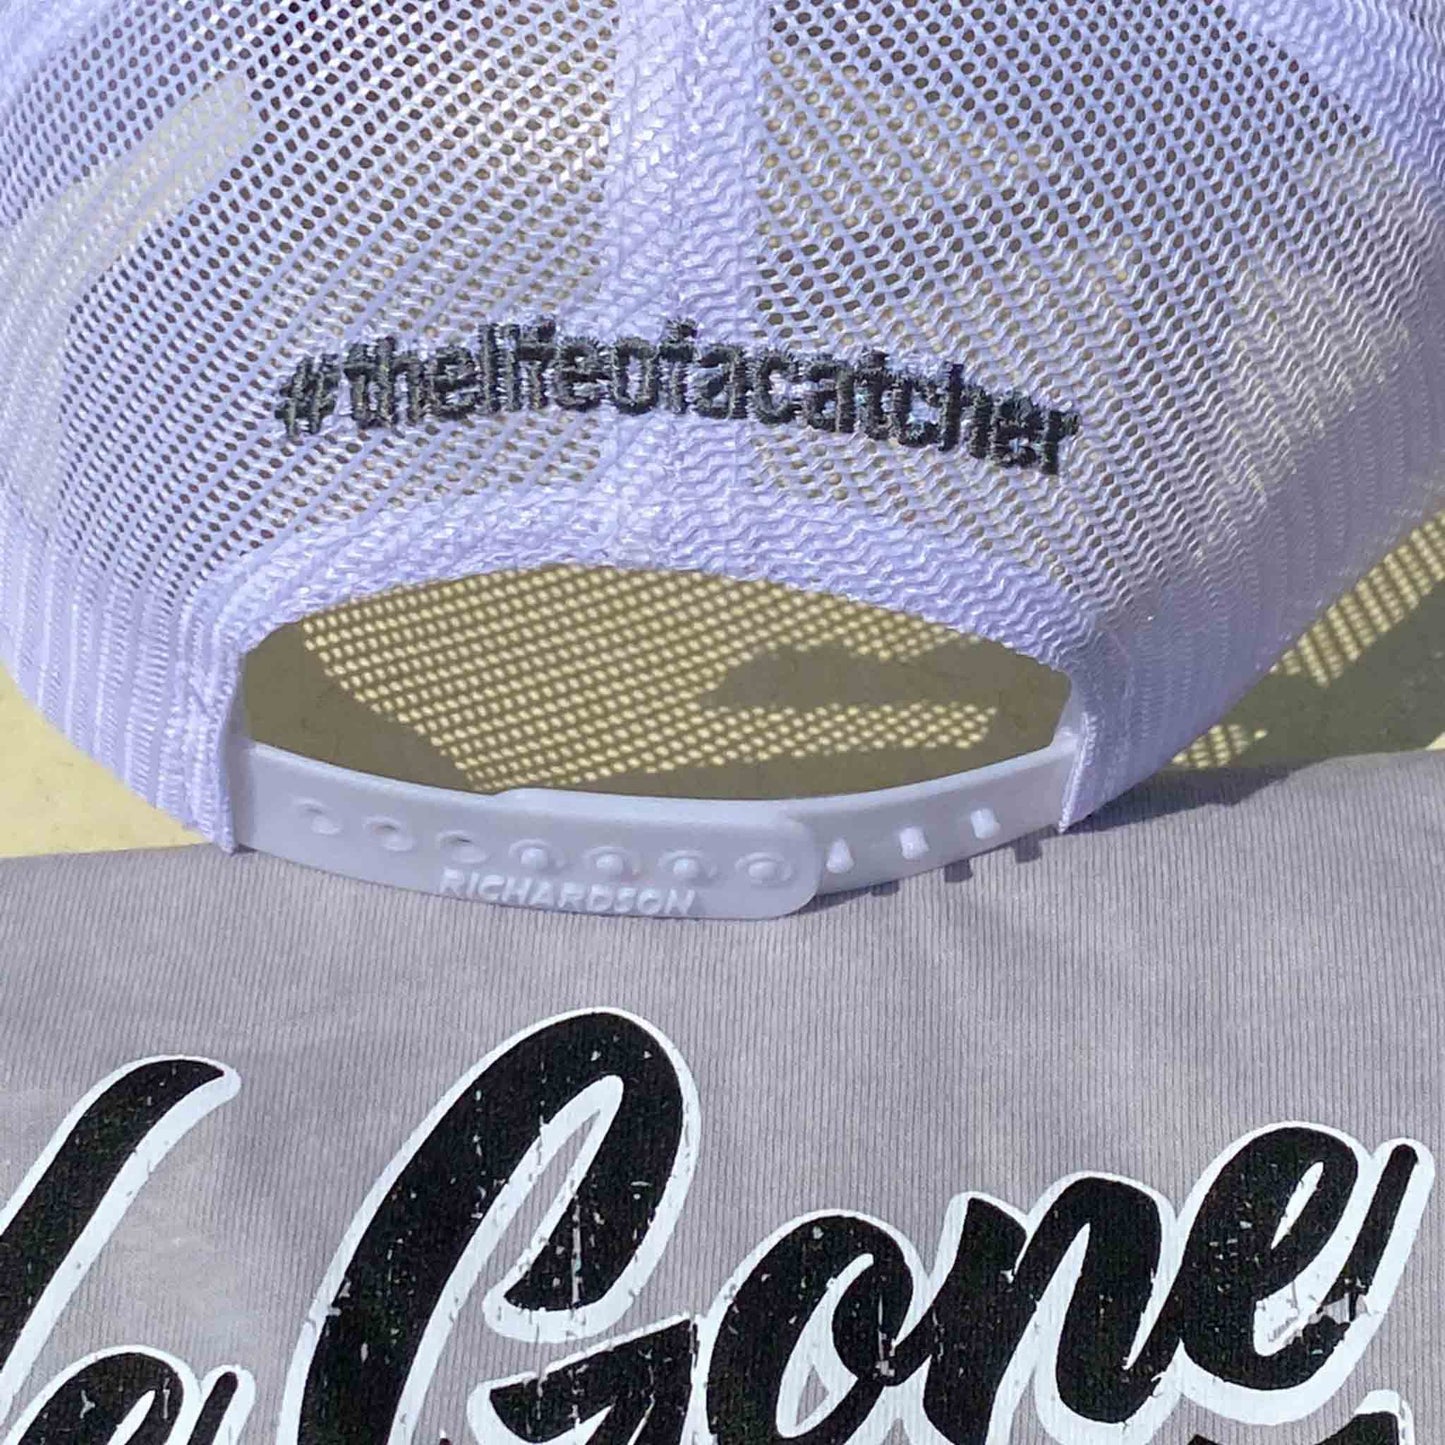 🔥The Catching Guy Signature Mask Hat 🔥